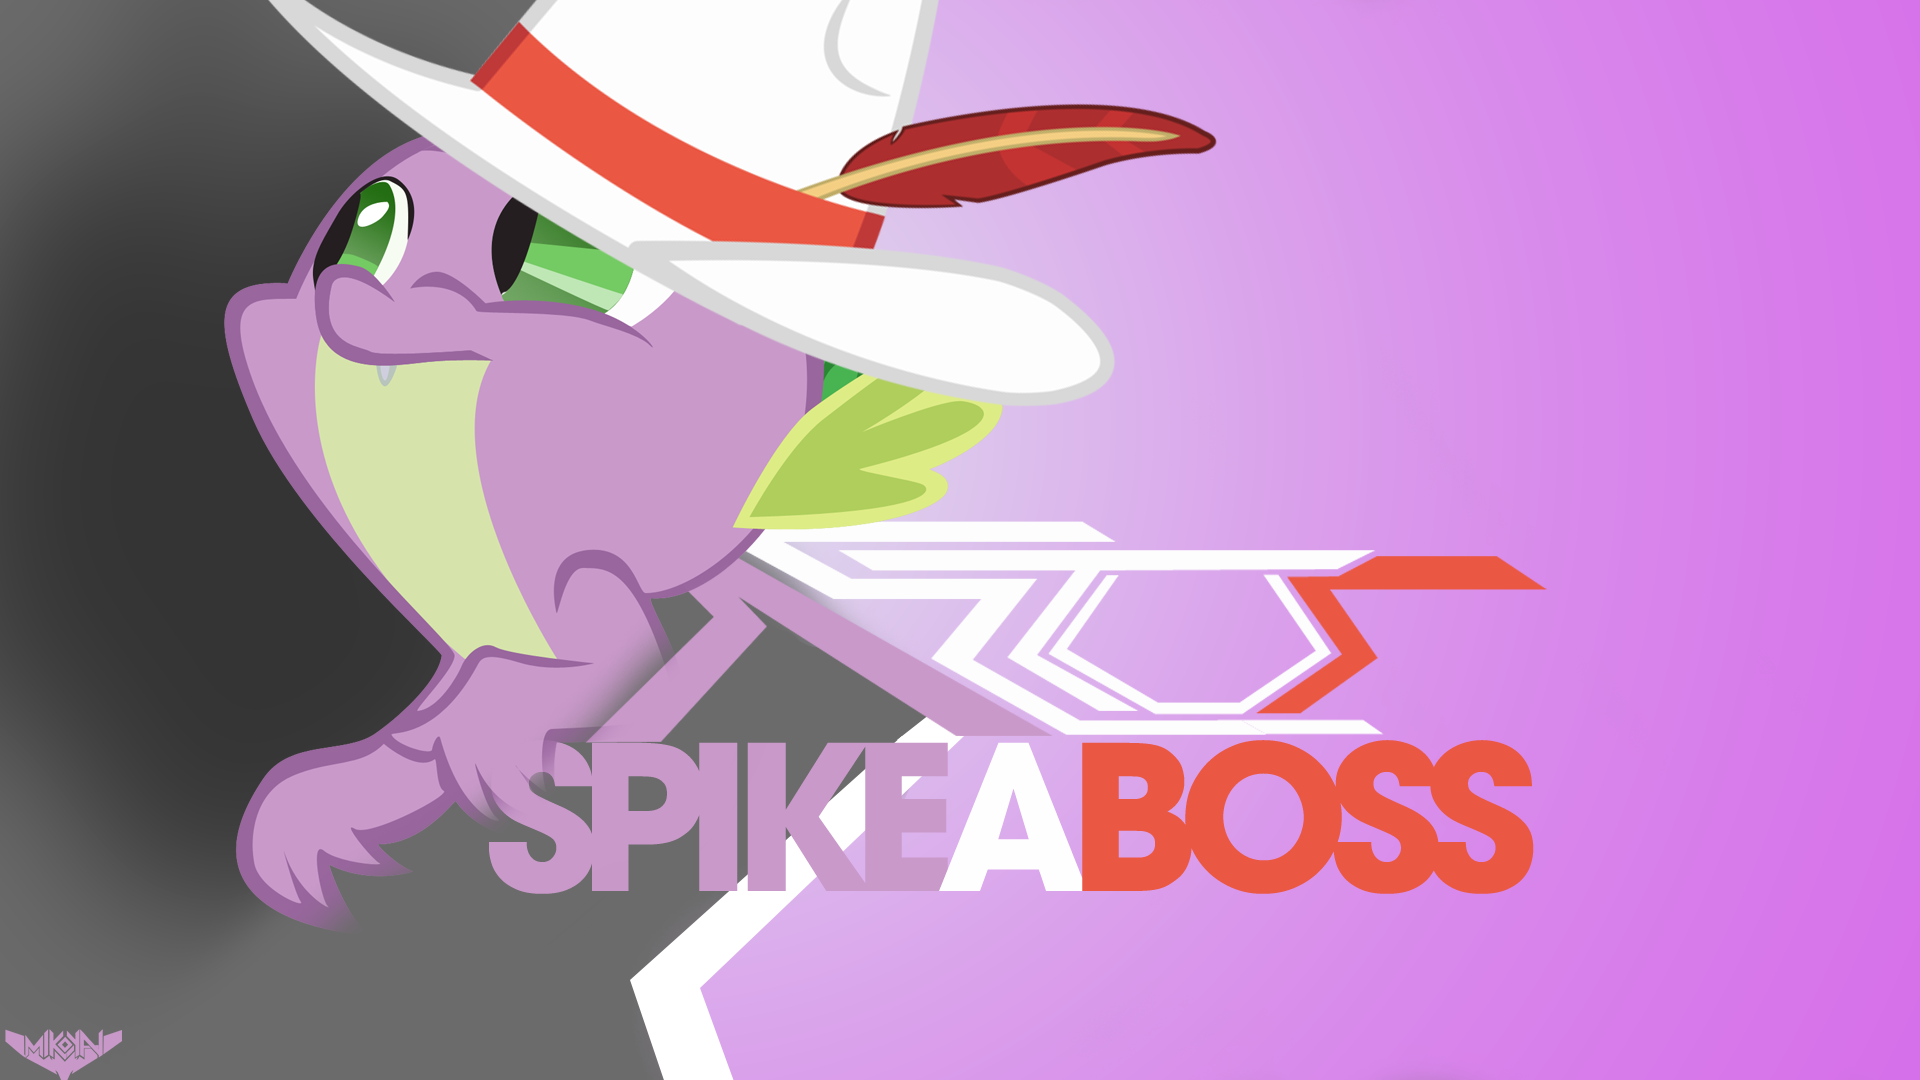 Aetus: Spike A Boss Cover Art by MikoyaNx